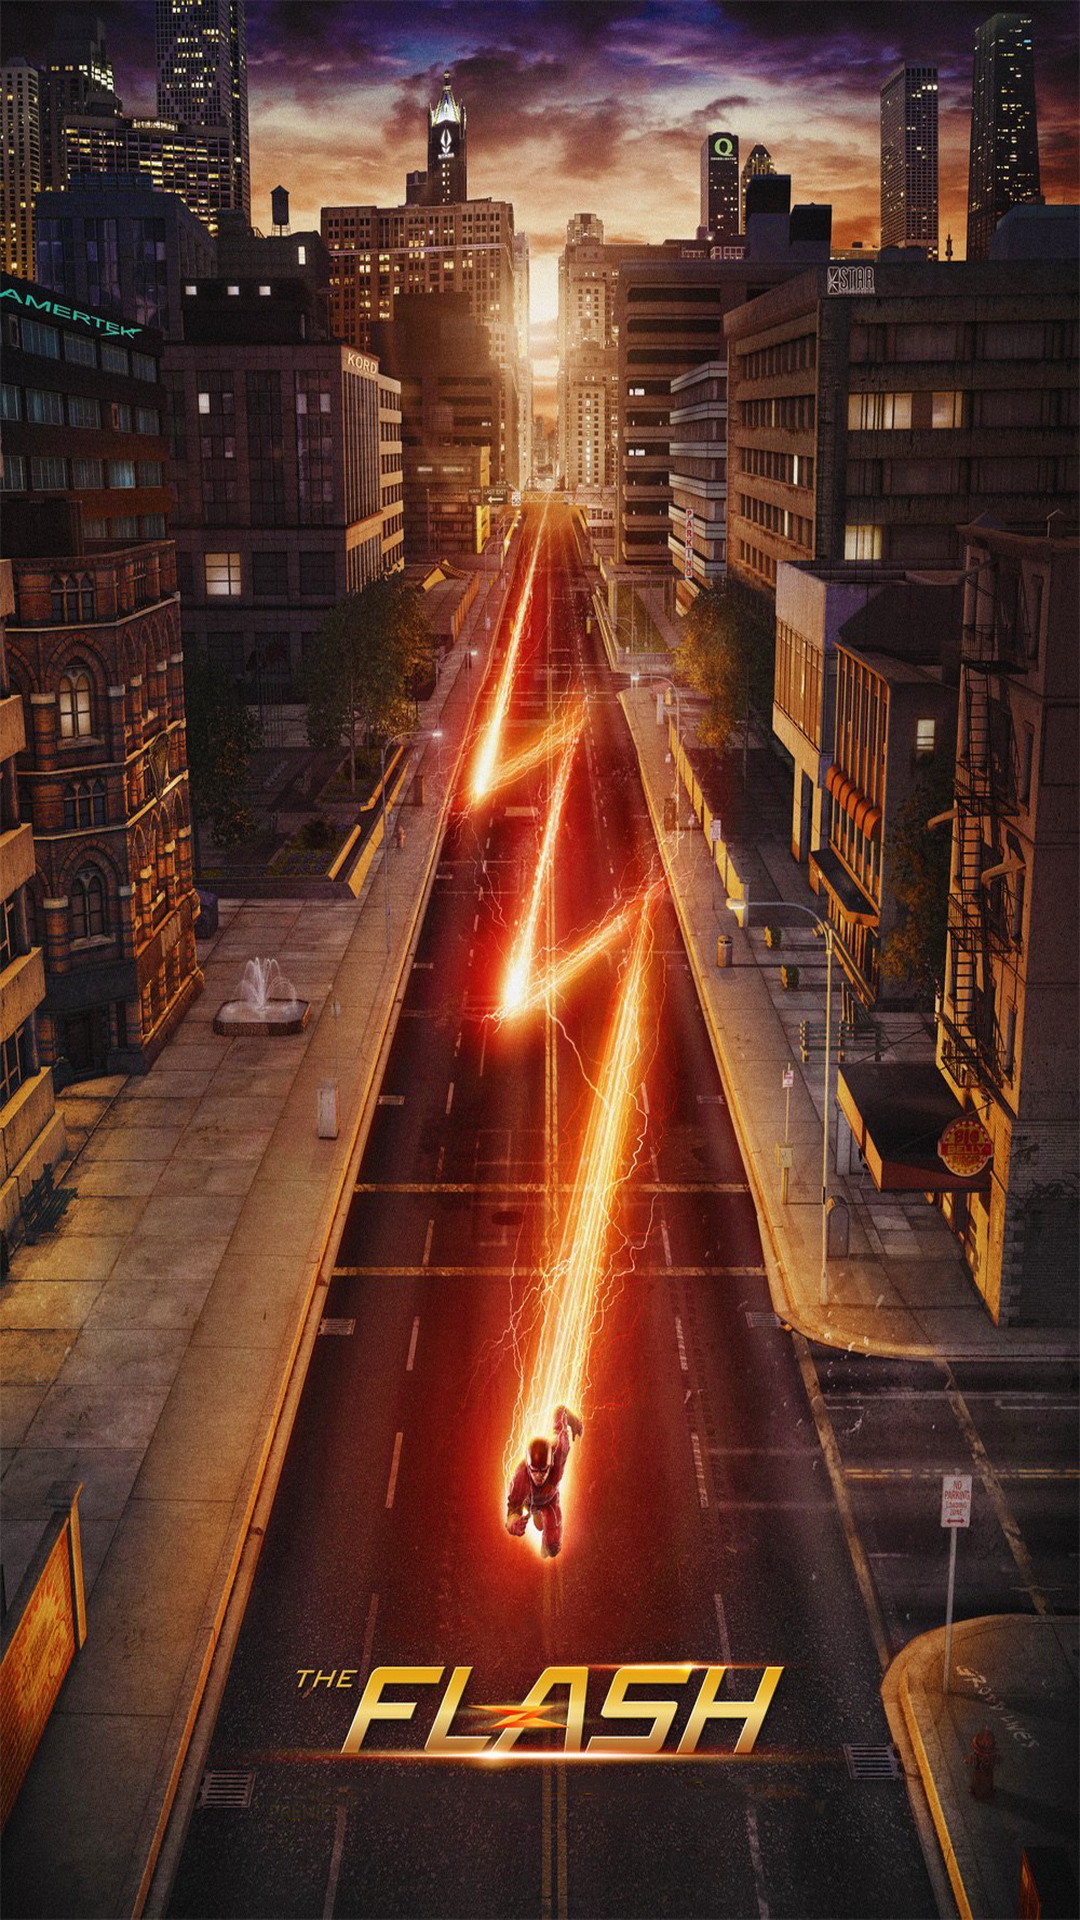 Wallpaper Weekends The Flash For Your Iphone 6 Plus Mactrast Iphone11 スマホ壁紙 待受画像ギャラリー